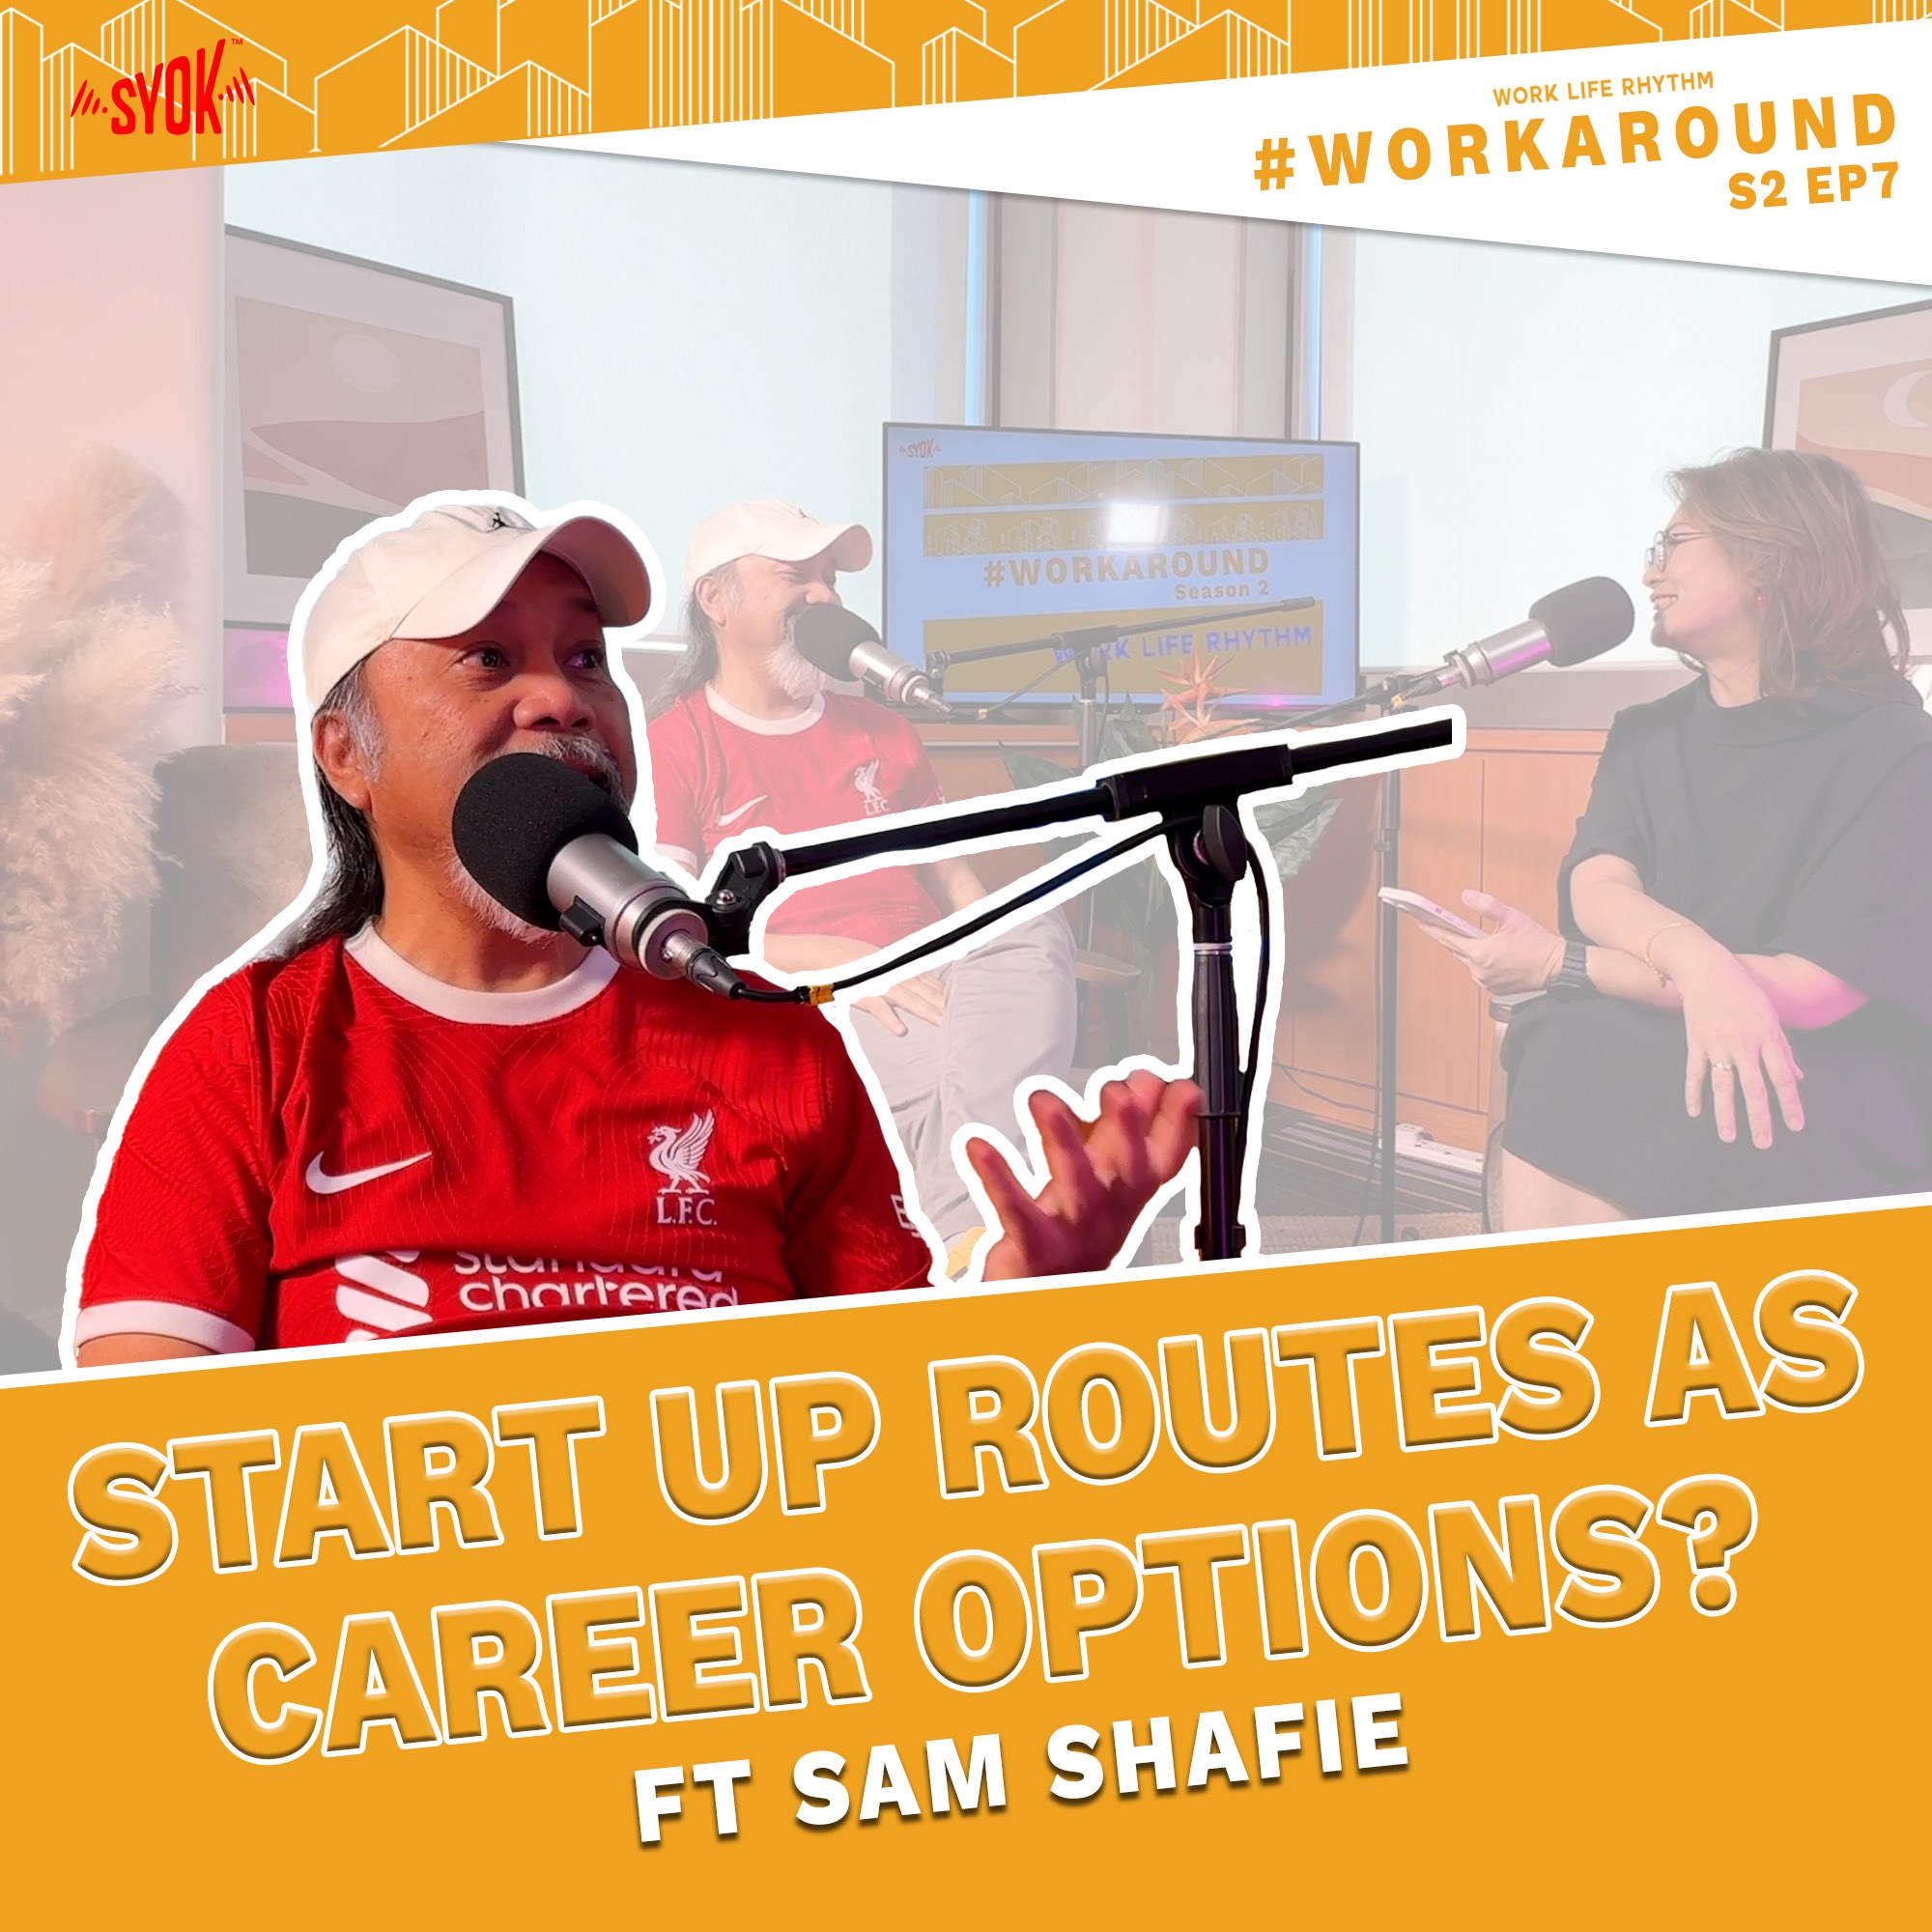 Start Up Routes as Career Options? ft Sam Shafie | #WORKAROUND S2EP7